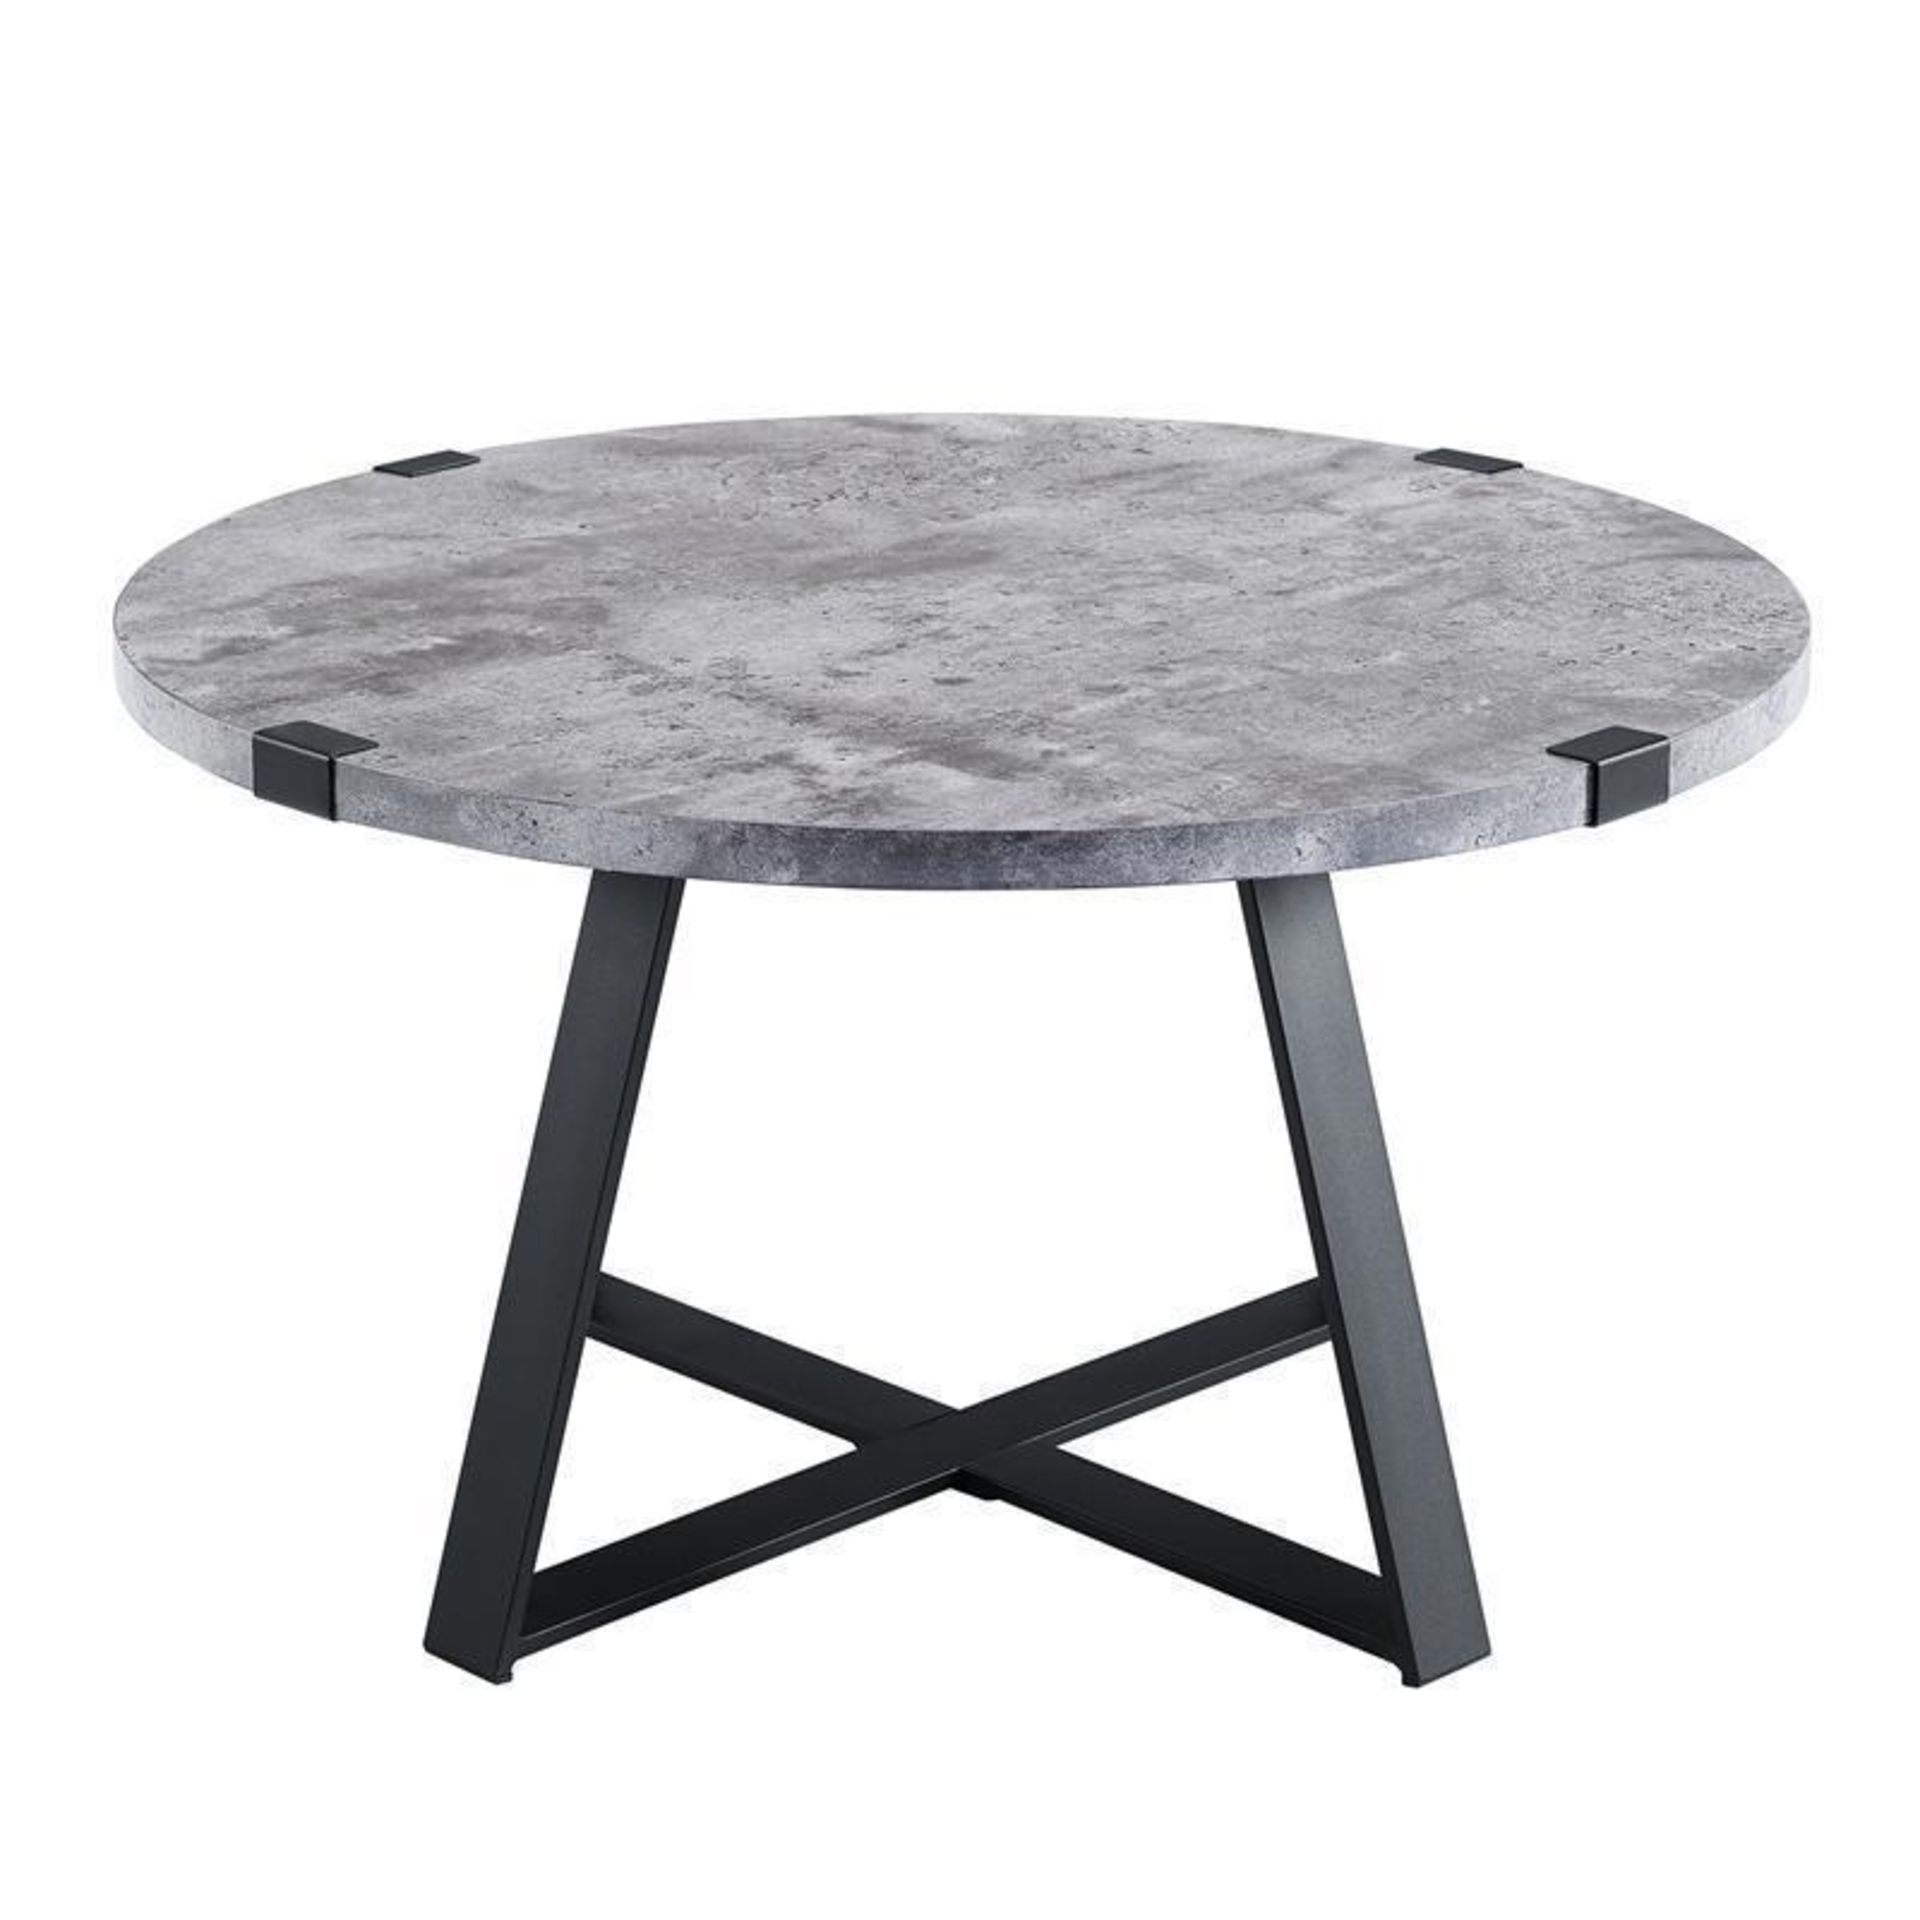 IRVINE DARK CONCRETE EFFECT COFFEE TABLE WITH BLACK FRAME (GREY) - RRP £245 - Image 3 of 5